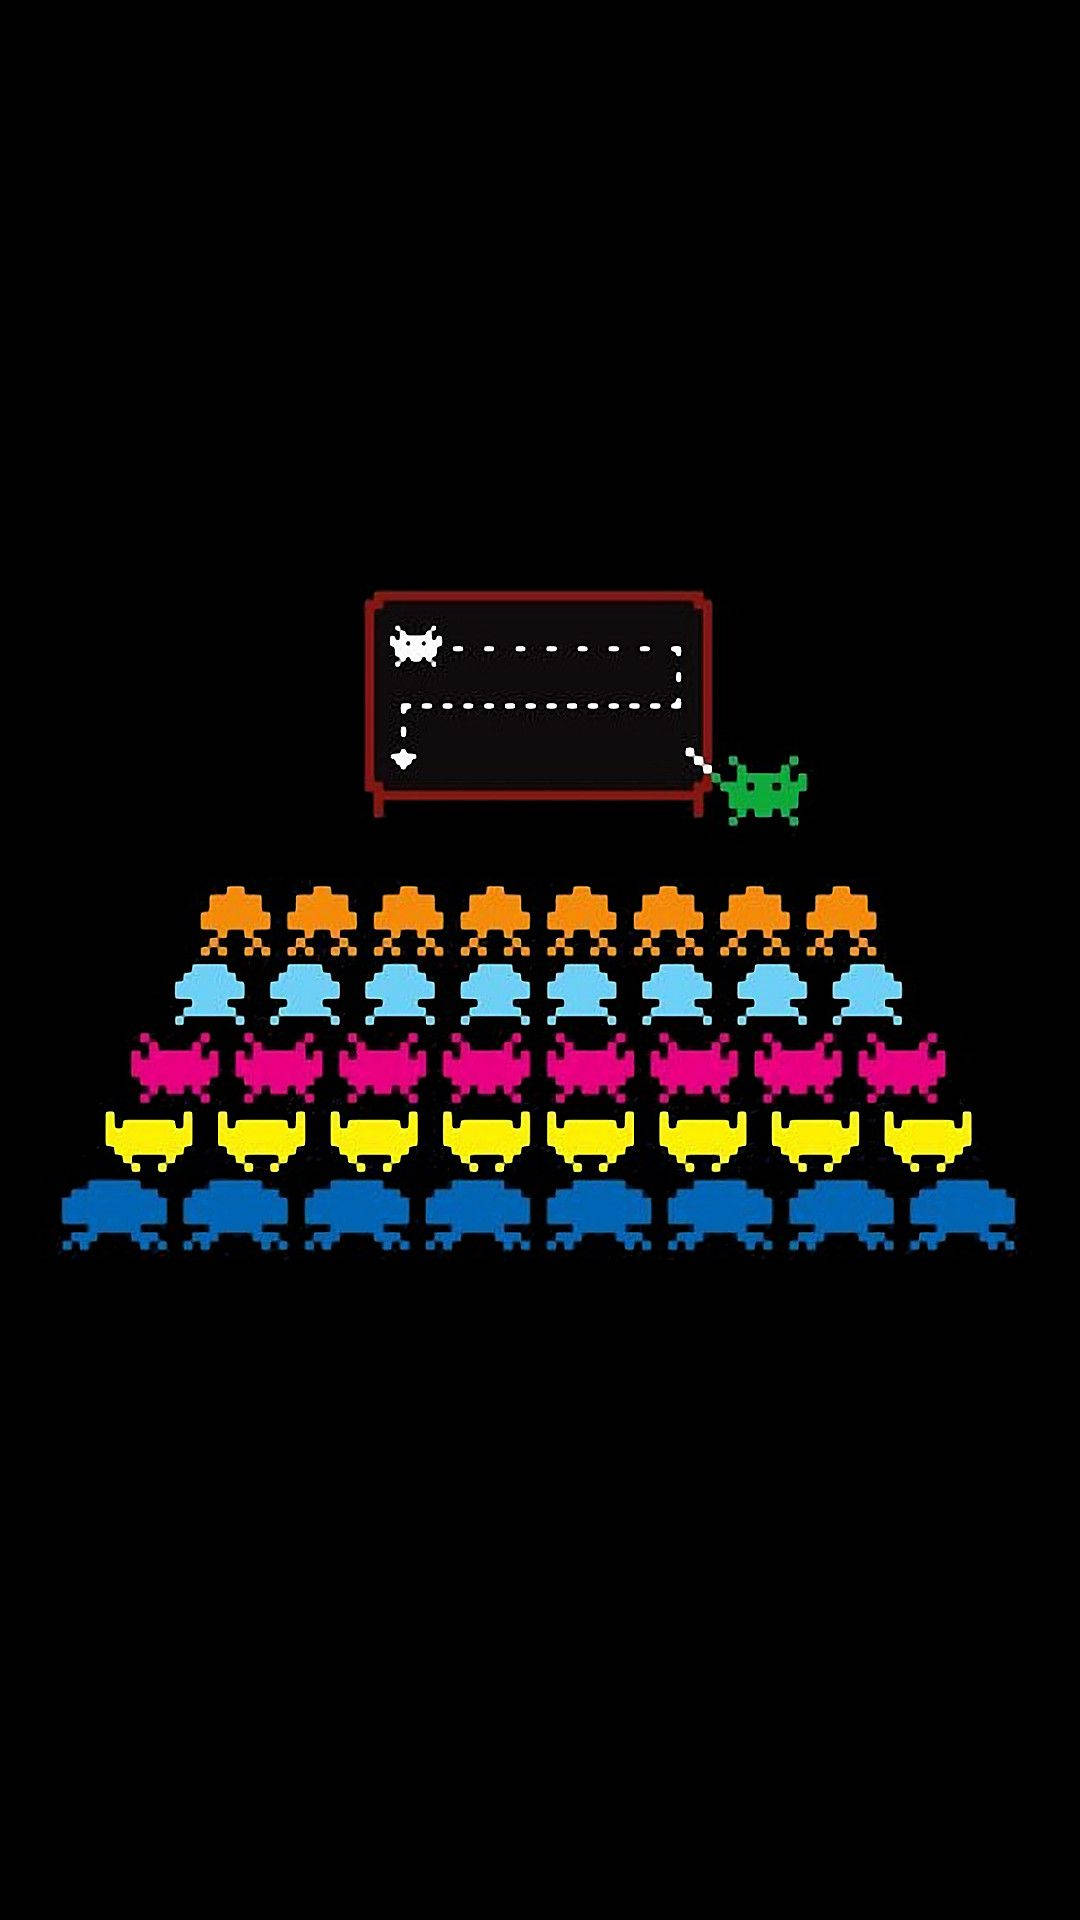 Aesthetic Retro Space Invaders Wallpaper